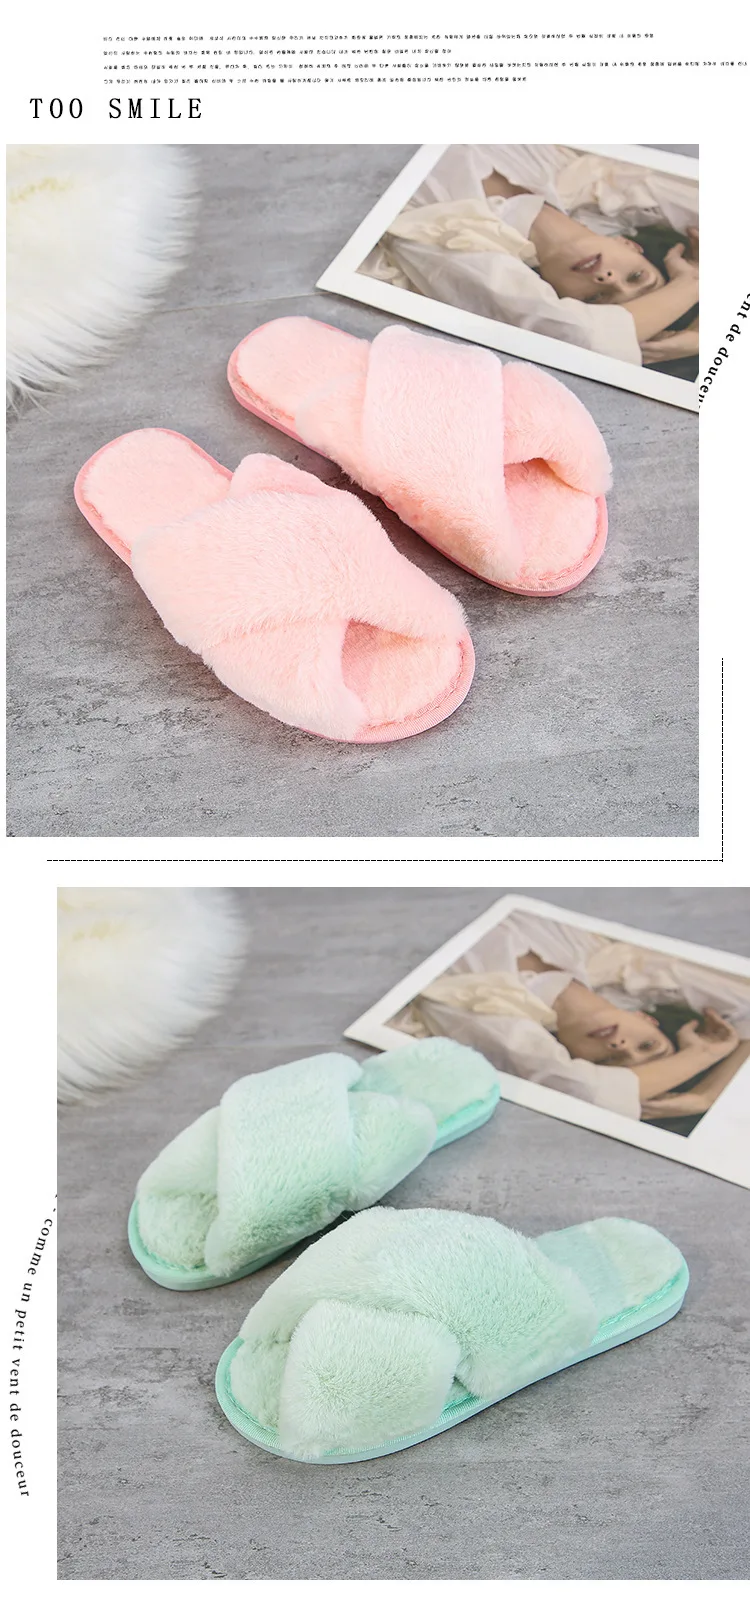 Large Size Women Home Slippers Rainbow Winter Warm Comfort Shoes 2020 New Woman Slip on Flats Slides Female Faux Fur Slippers